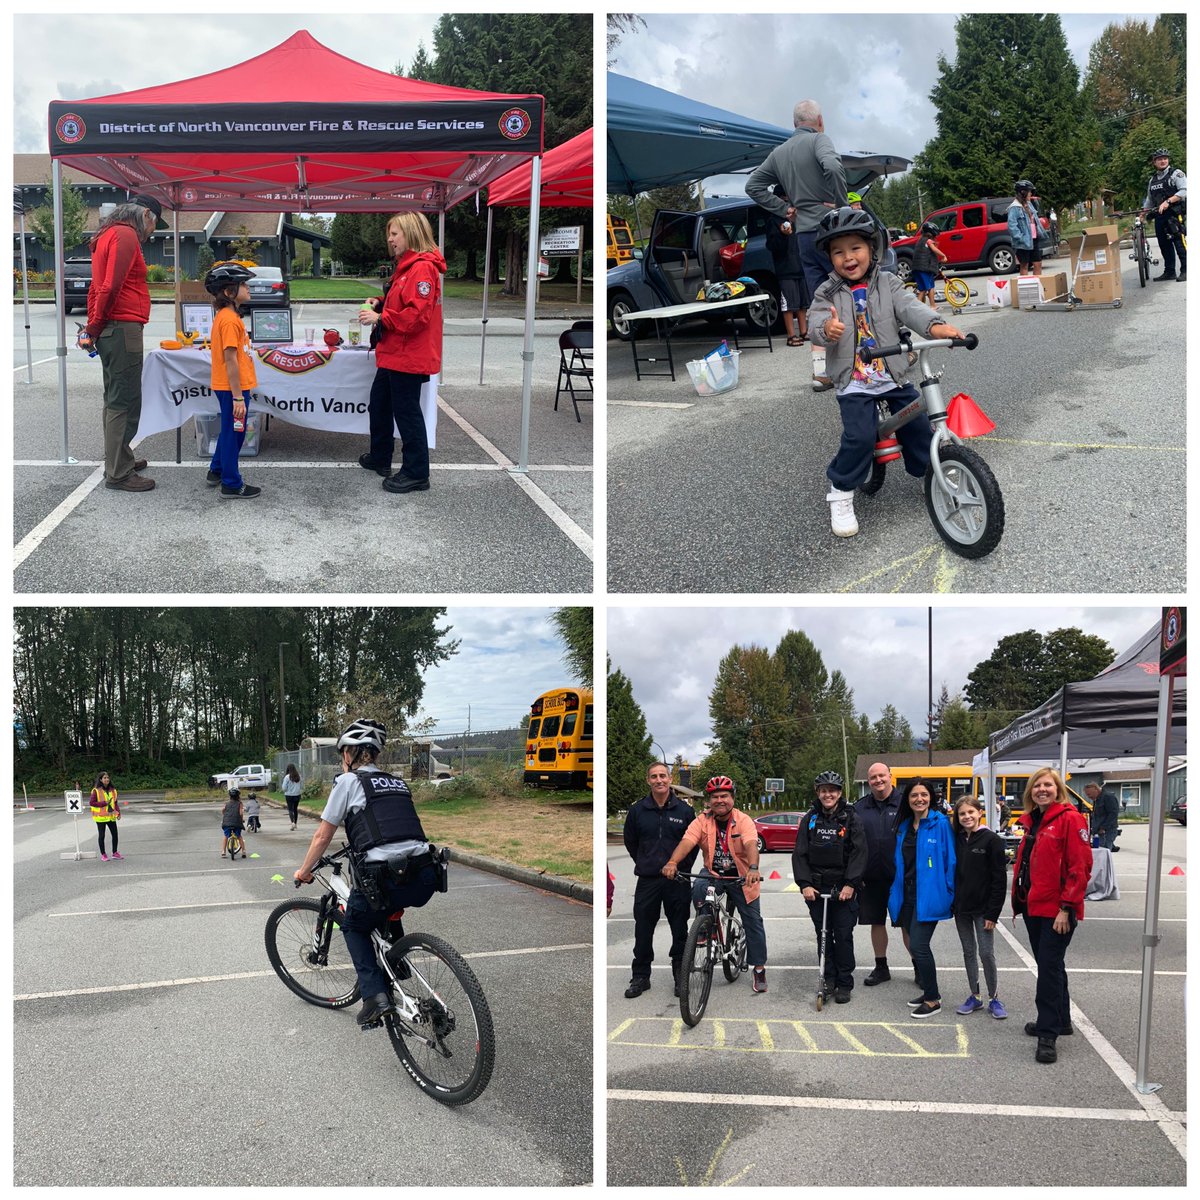 Thank you to @SquamishNation for inviting us to the ICBC/ RCMP Bike Safety Rodeo! We had a great time 😊 #DNVFRS #NorthVan #roadsafetylou #NVAnRCMP #canadasafetycsc